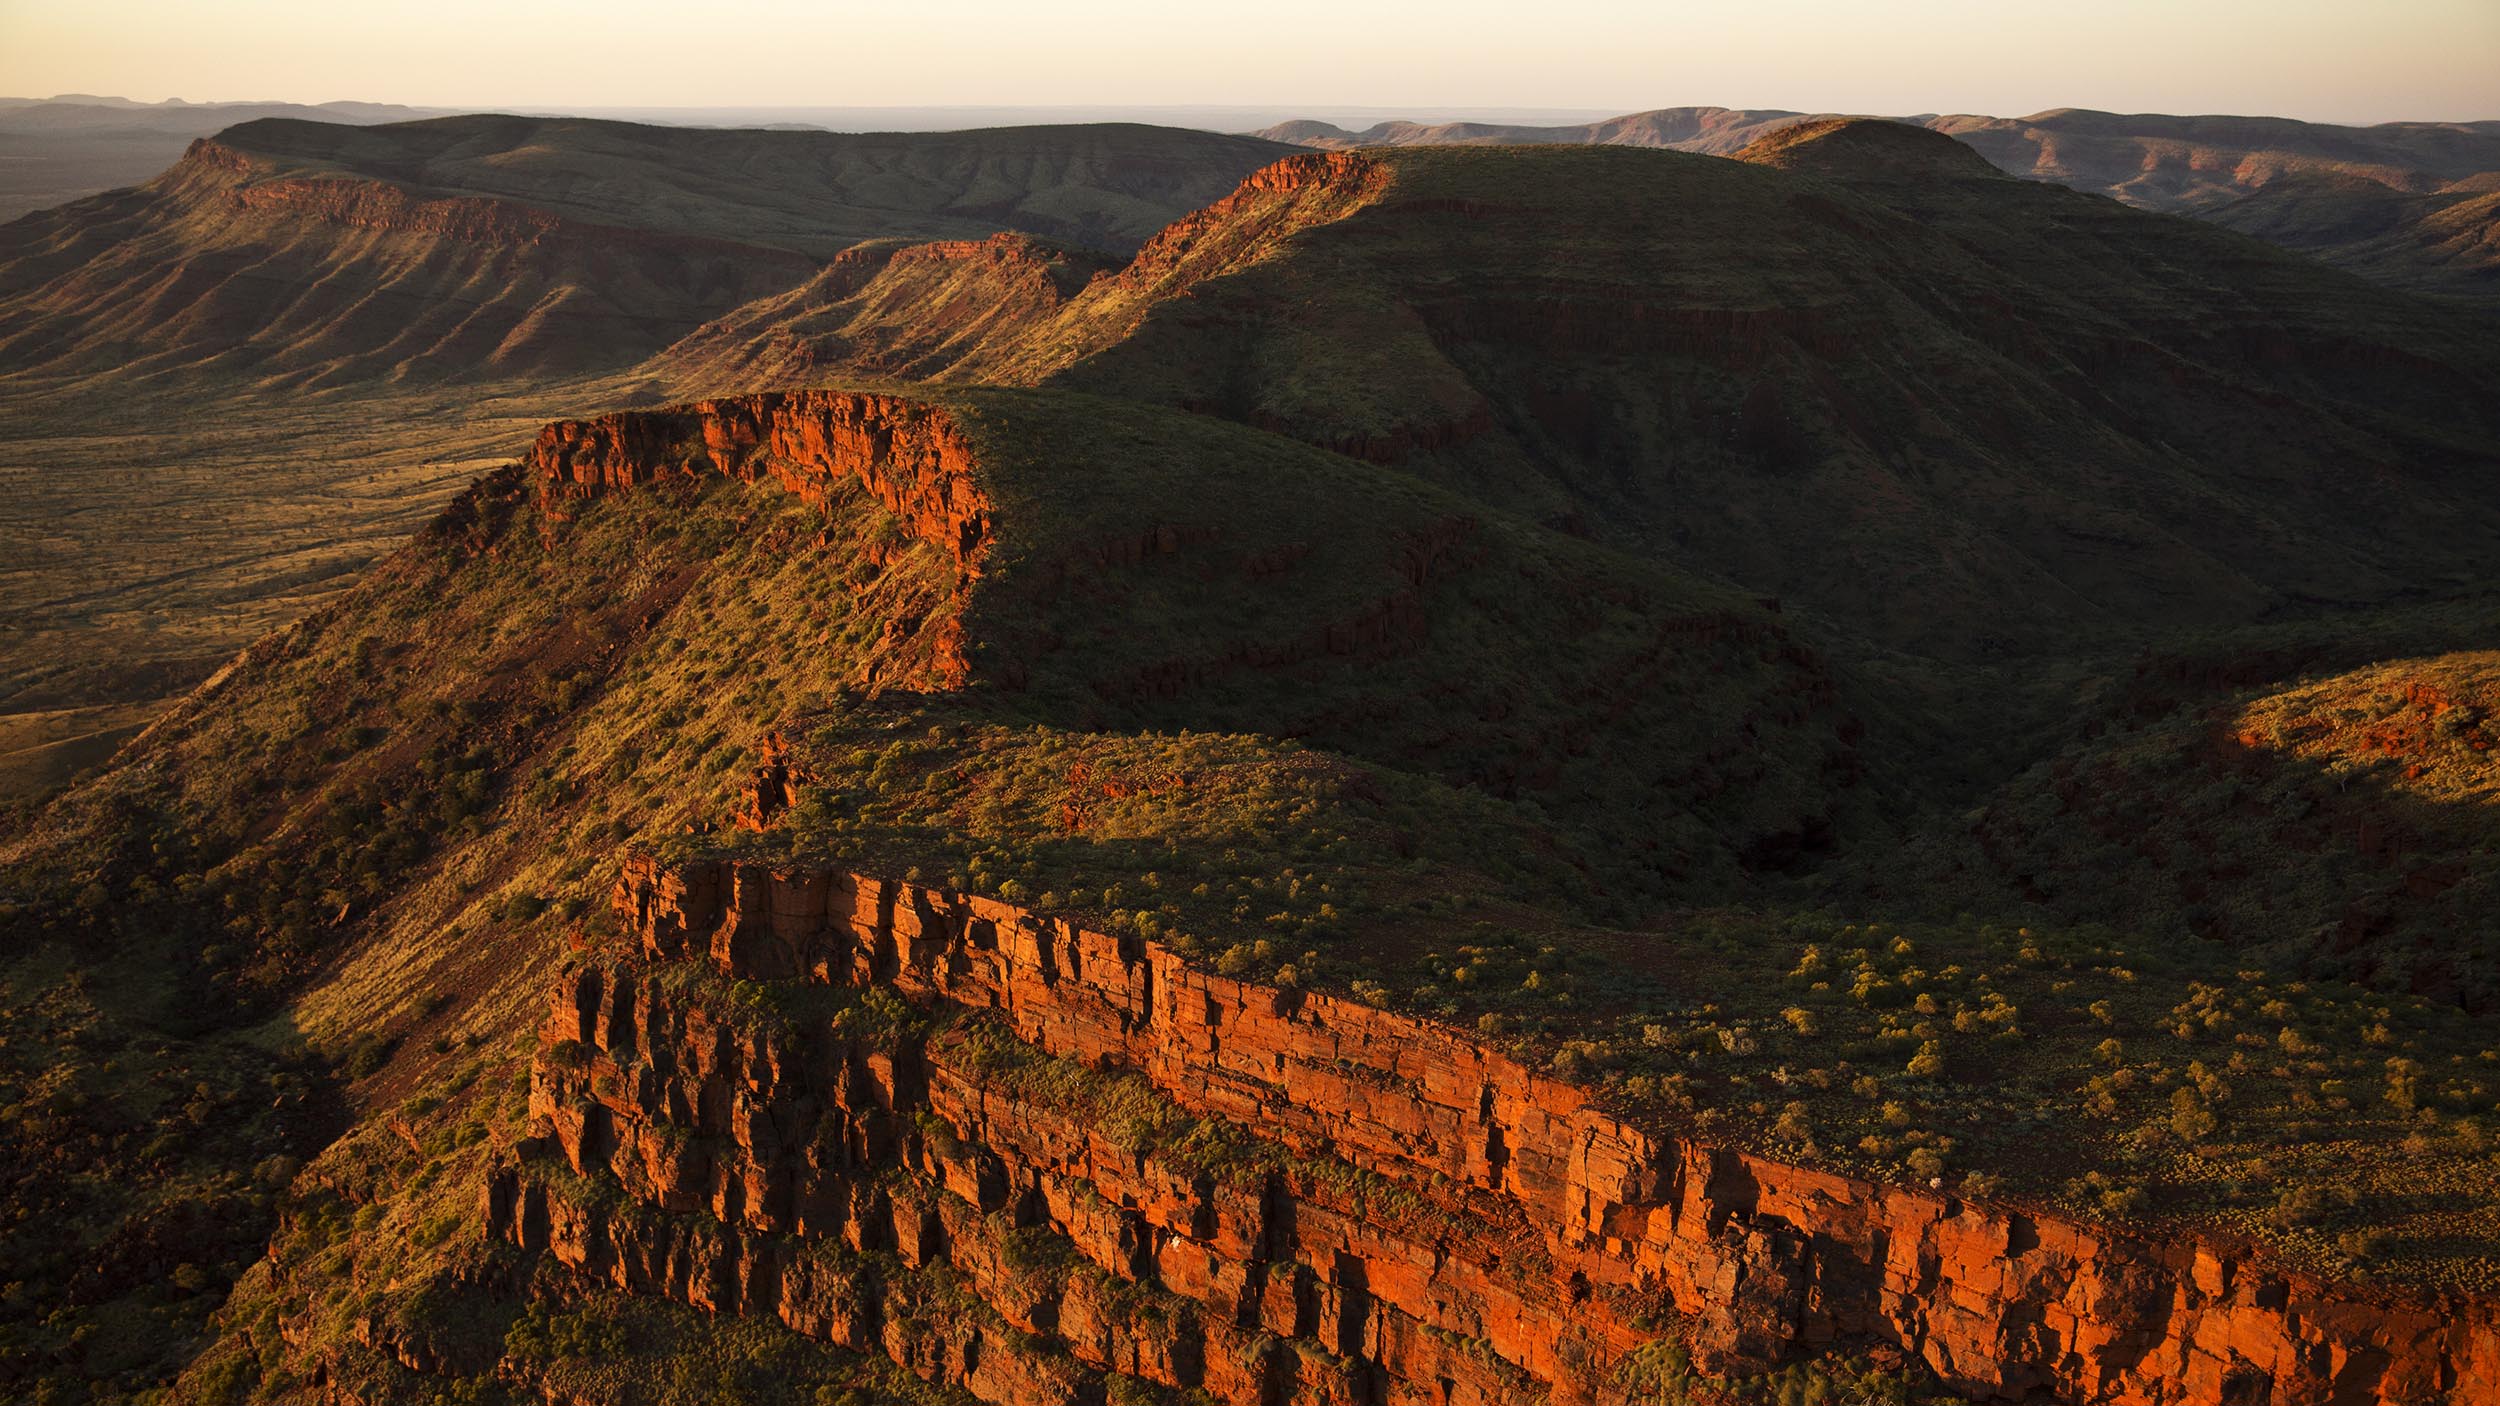 A typical Pilbara landscape of mesas, escarpments, rolling hills and spinifex grasslands at Mount Frederick, Western Australia.